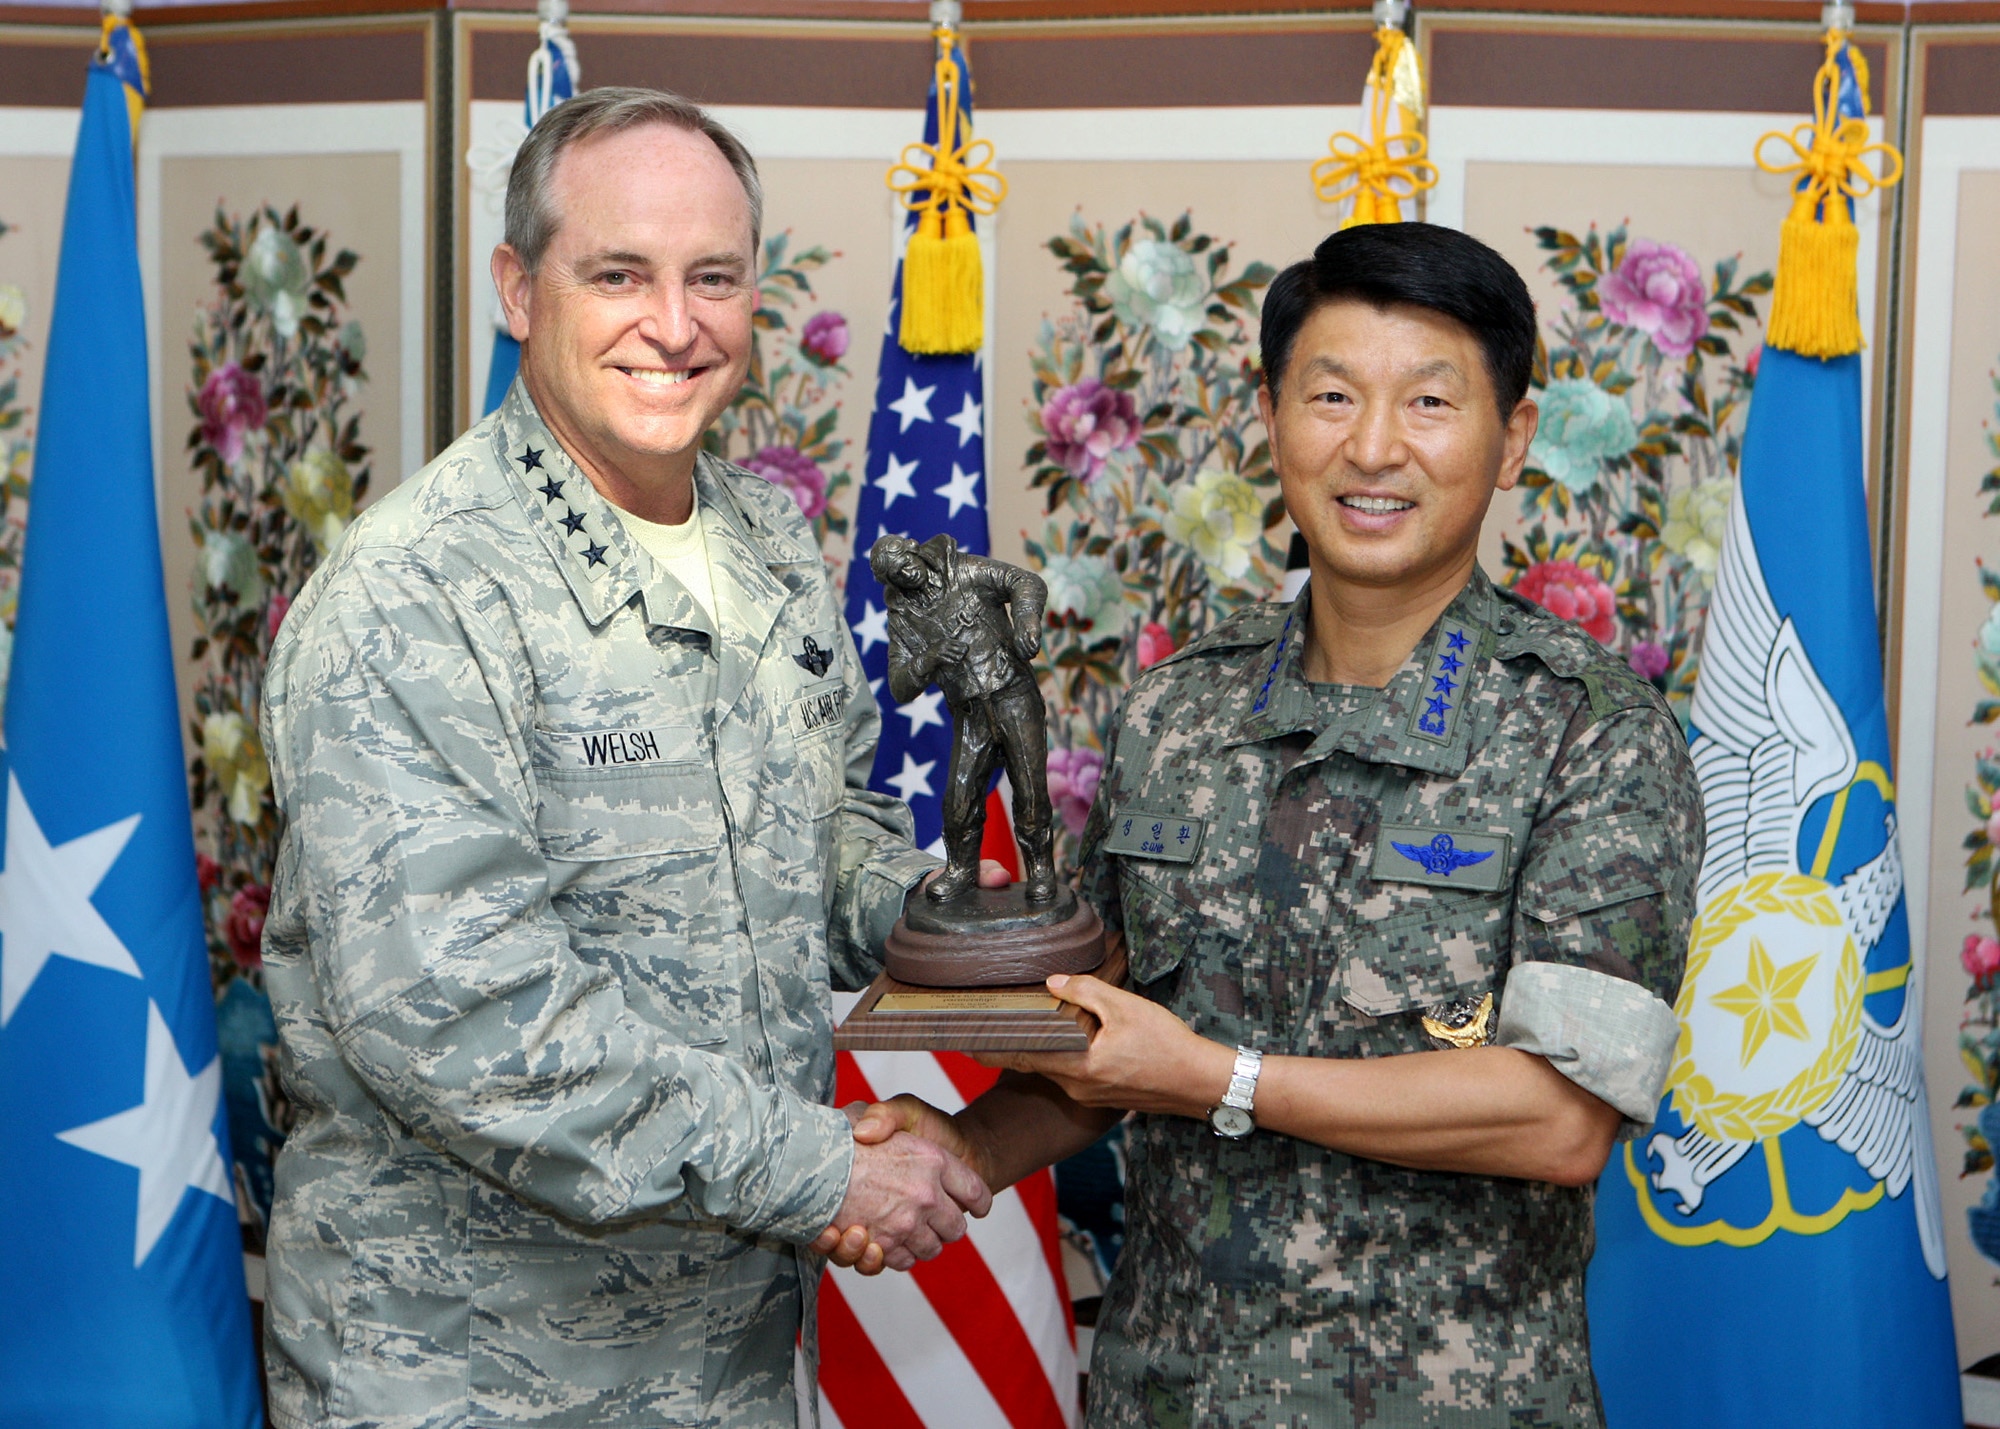 Air Force Chief of Staff Gen. Mark A. Welsh III and Republic of Korea Air Force Chief of Staff Gen. Sung Il-Hwan exchange gifts following a meeting in Seoul, Republic of Korea, Aug. 23, 2013. As part of a two-week tour of the Pacific, Welsh met with military partners in Korea and Japan, as well as Airmen and their families, to discuss opportunities and challenges in the region. (Courtesy photo/Republic of Korea Air Force)